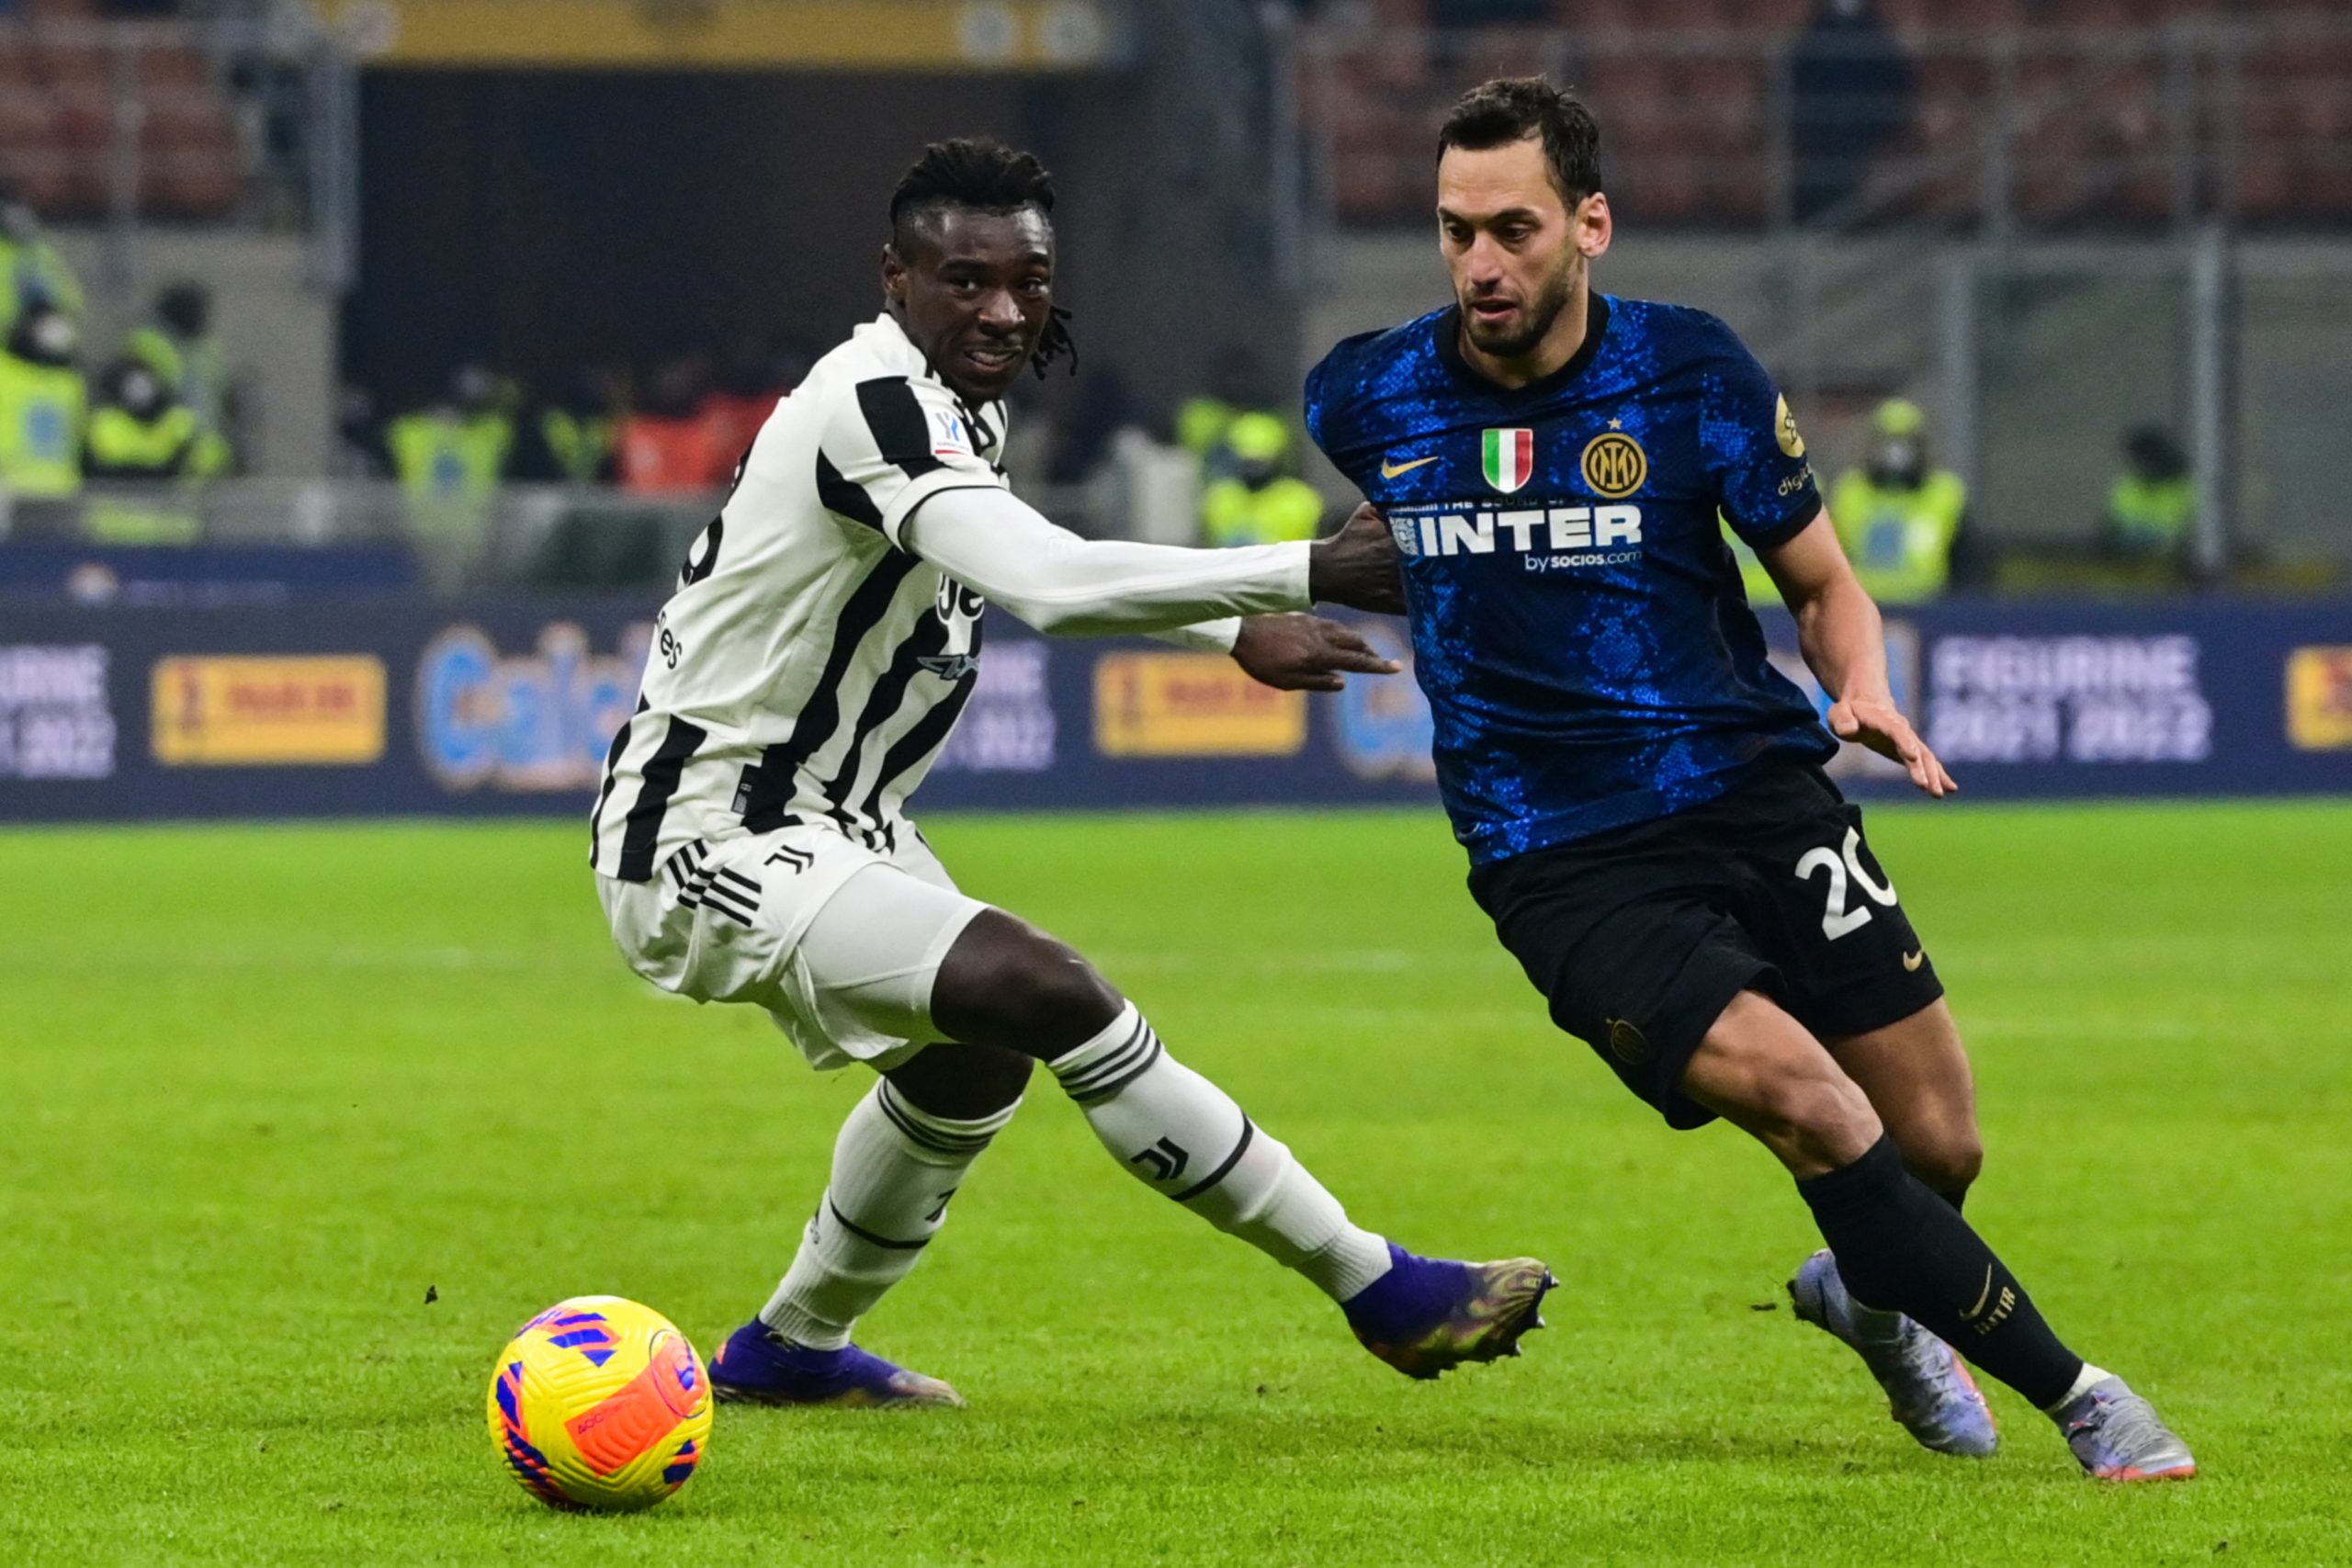 Fears over Coronavirus in Italy as Juventus U23 play infected team – Citi  Sports Online